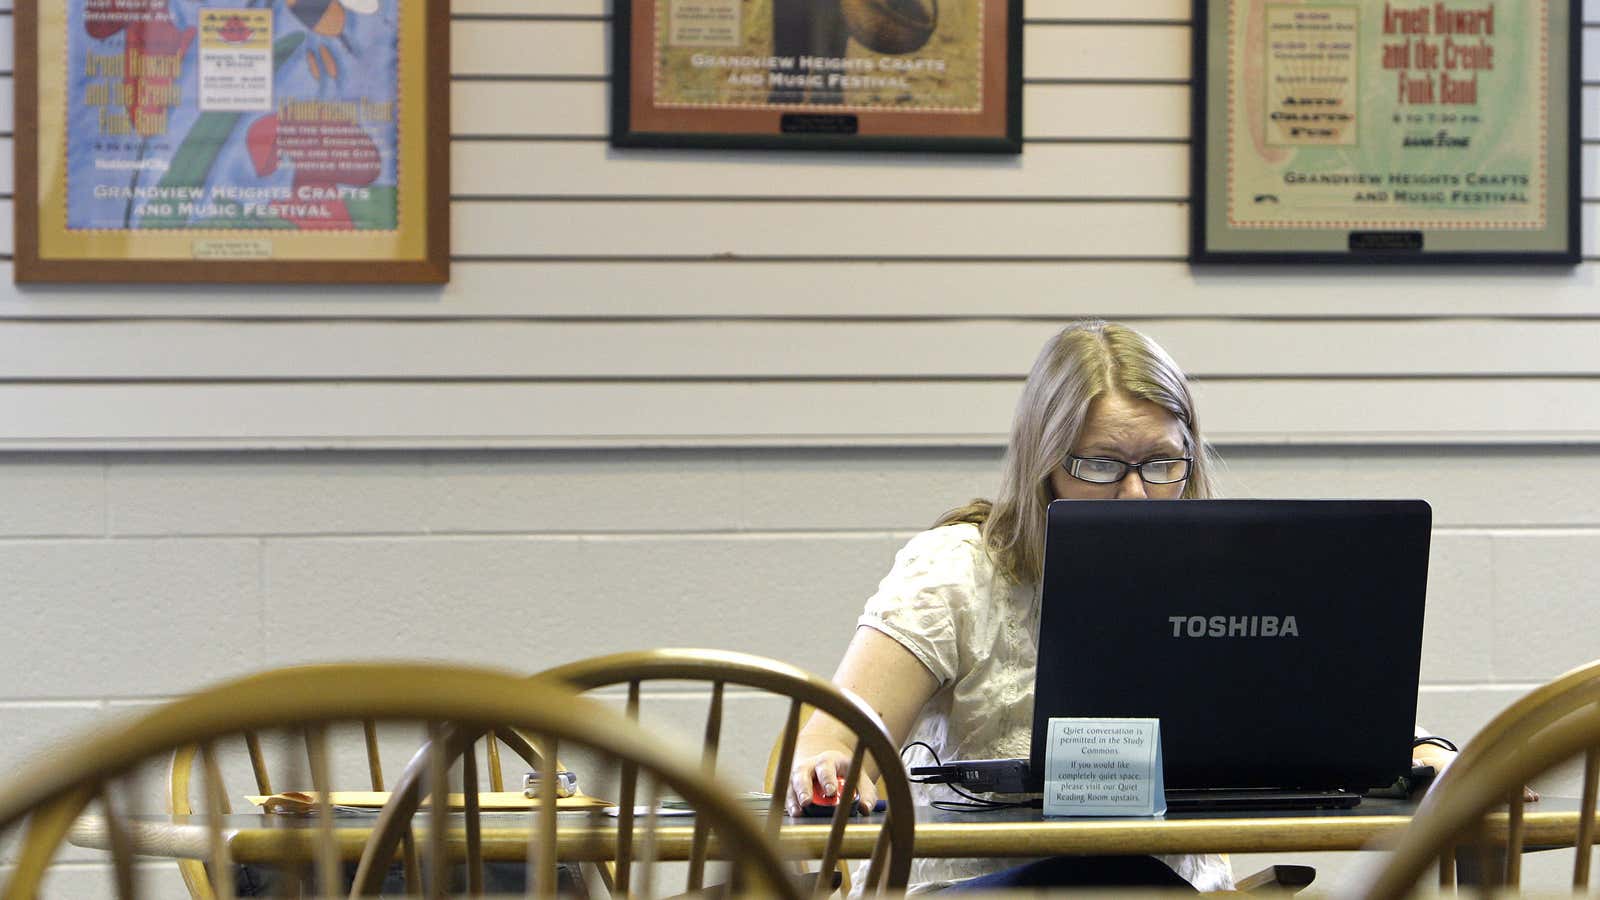 Ohio State student Lindsey Long, of Hilliard, uses the wi-fi connection at Grandview Heights Public Library Wednesday, Sept. 1, 2010, in Grandview Heights, Ohio. Long…